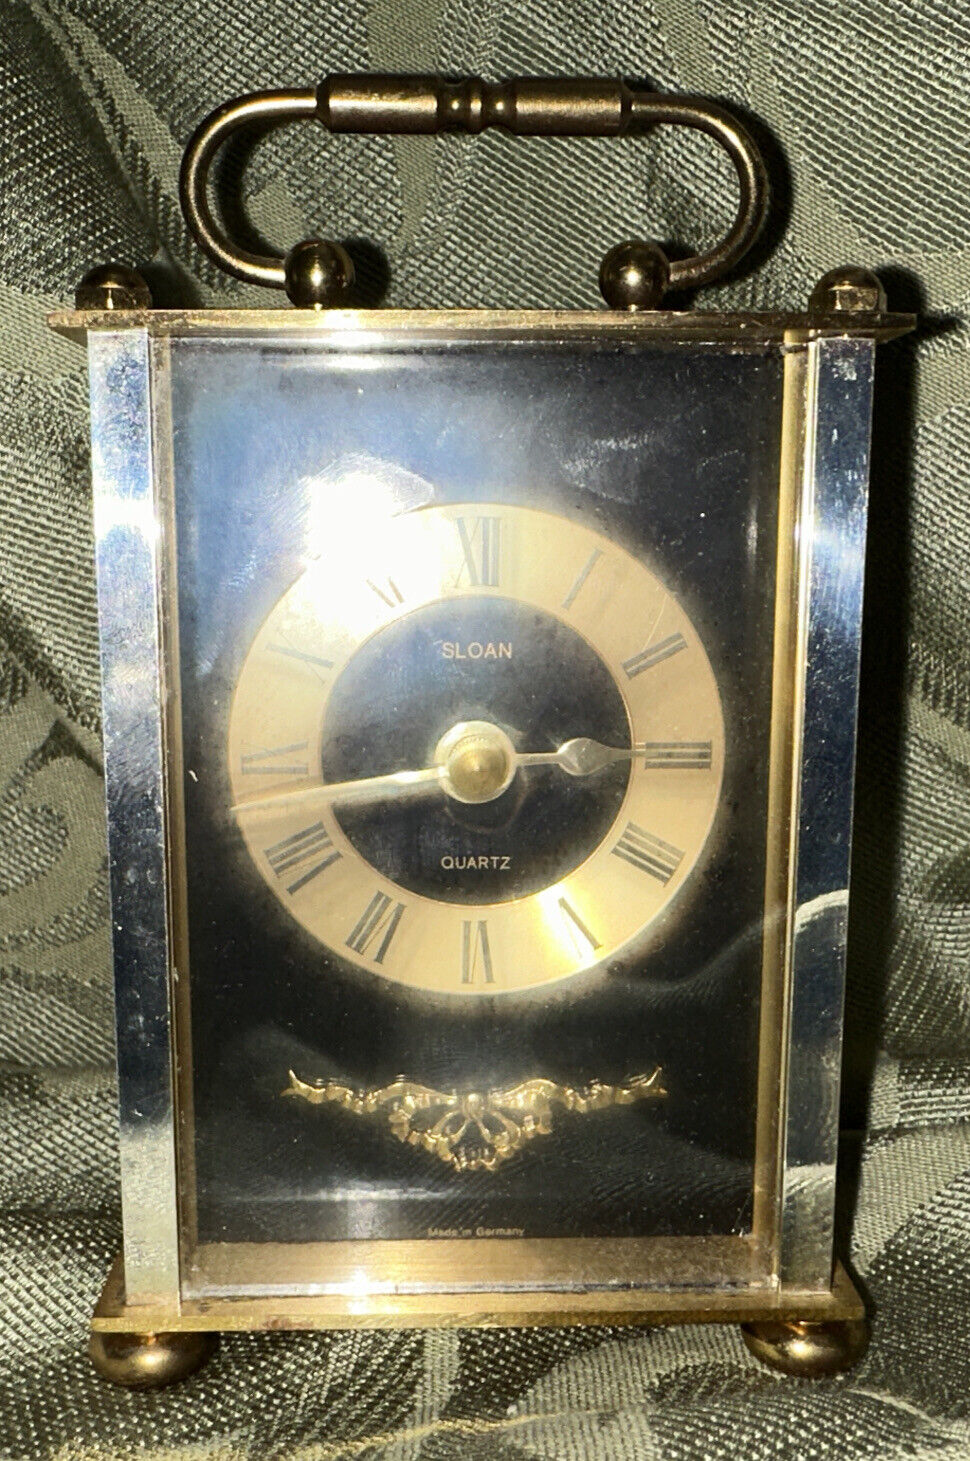 Vintage Sloan Quartz Small Brass Clock Battery Operated - Works